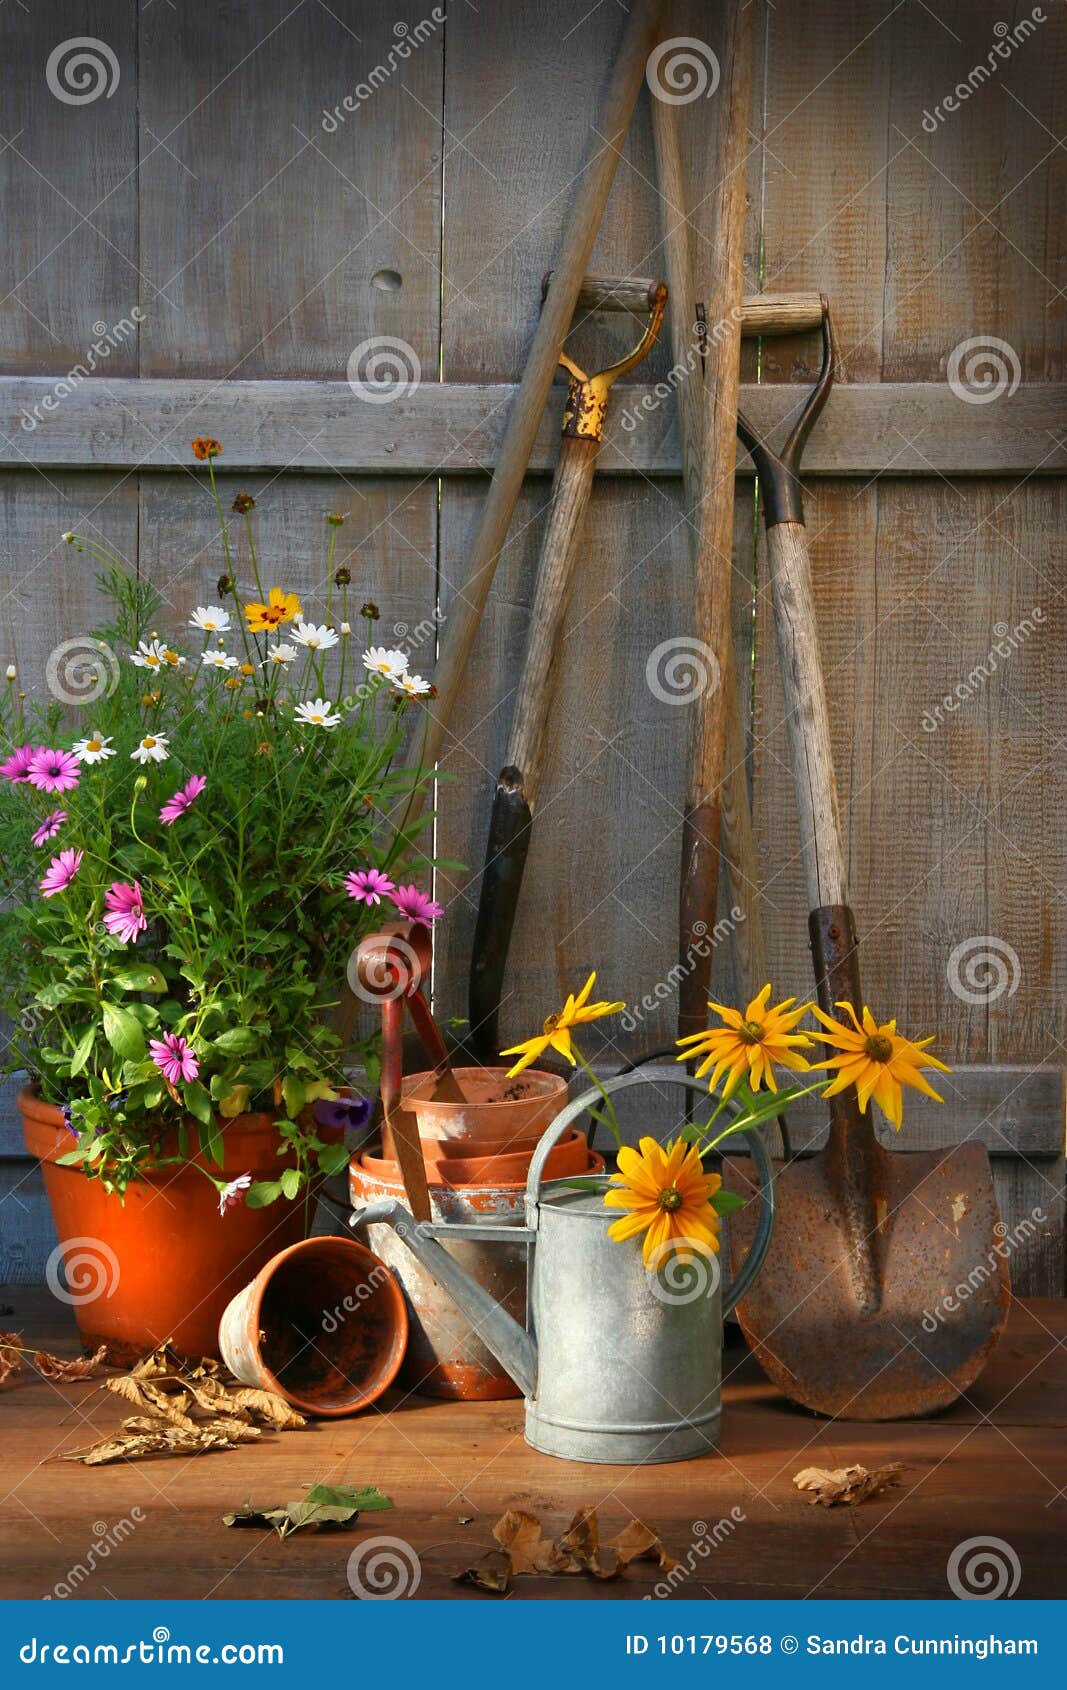 Garden Shed With Tools And Pots Royalty Free Stock Photos ...